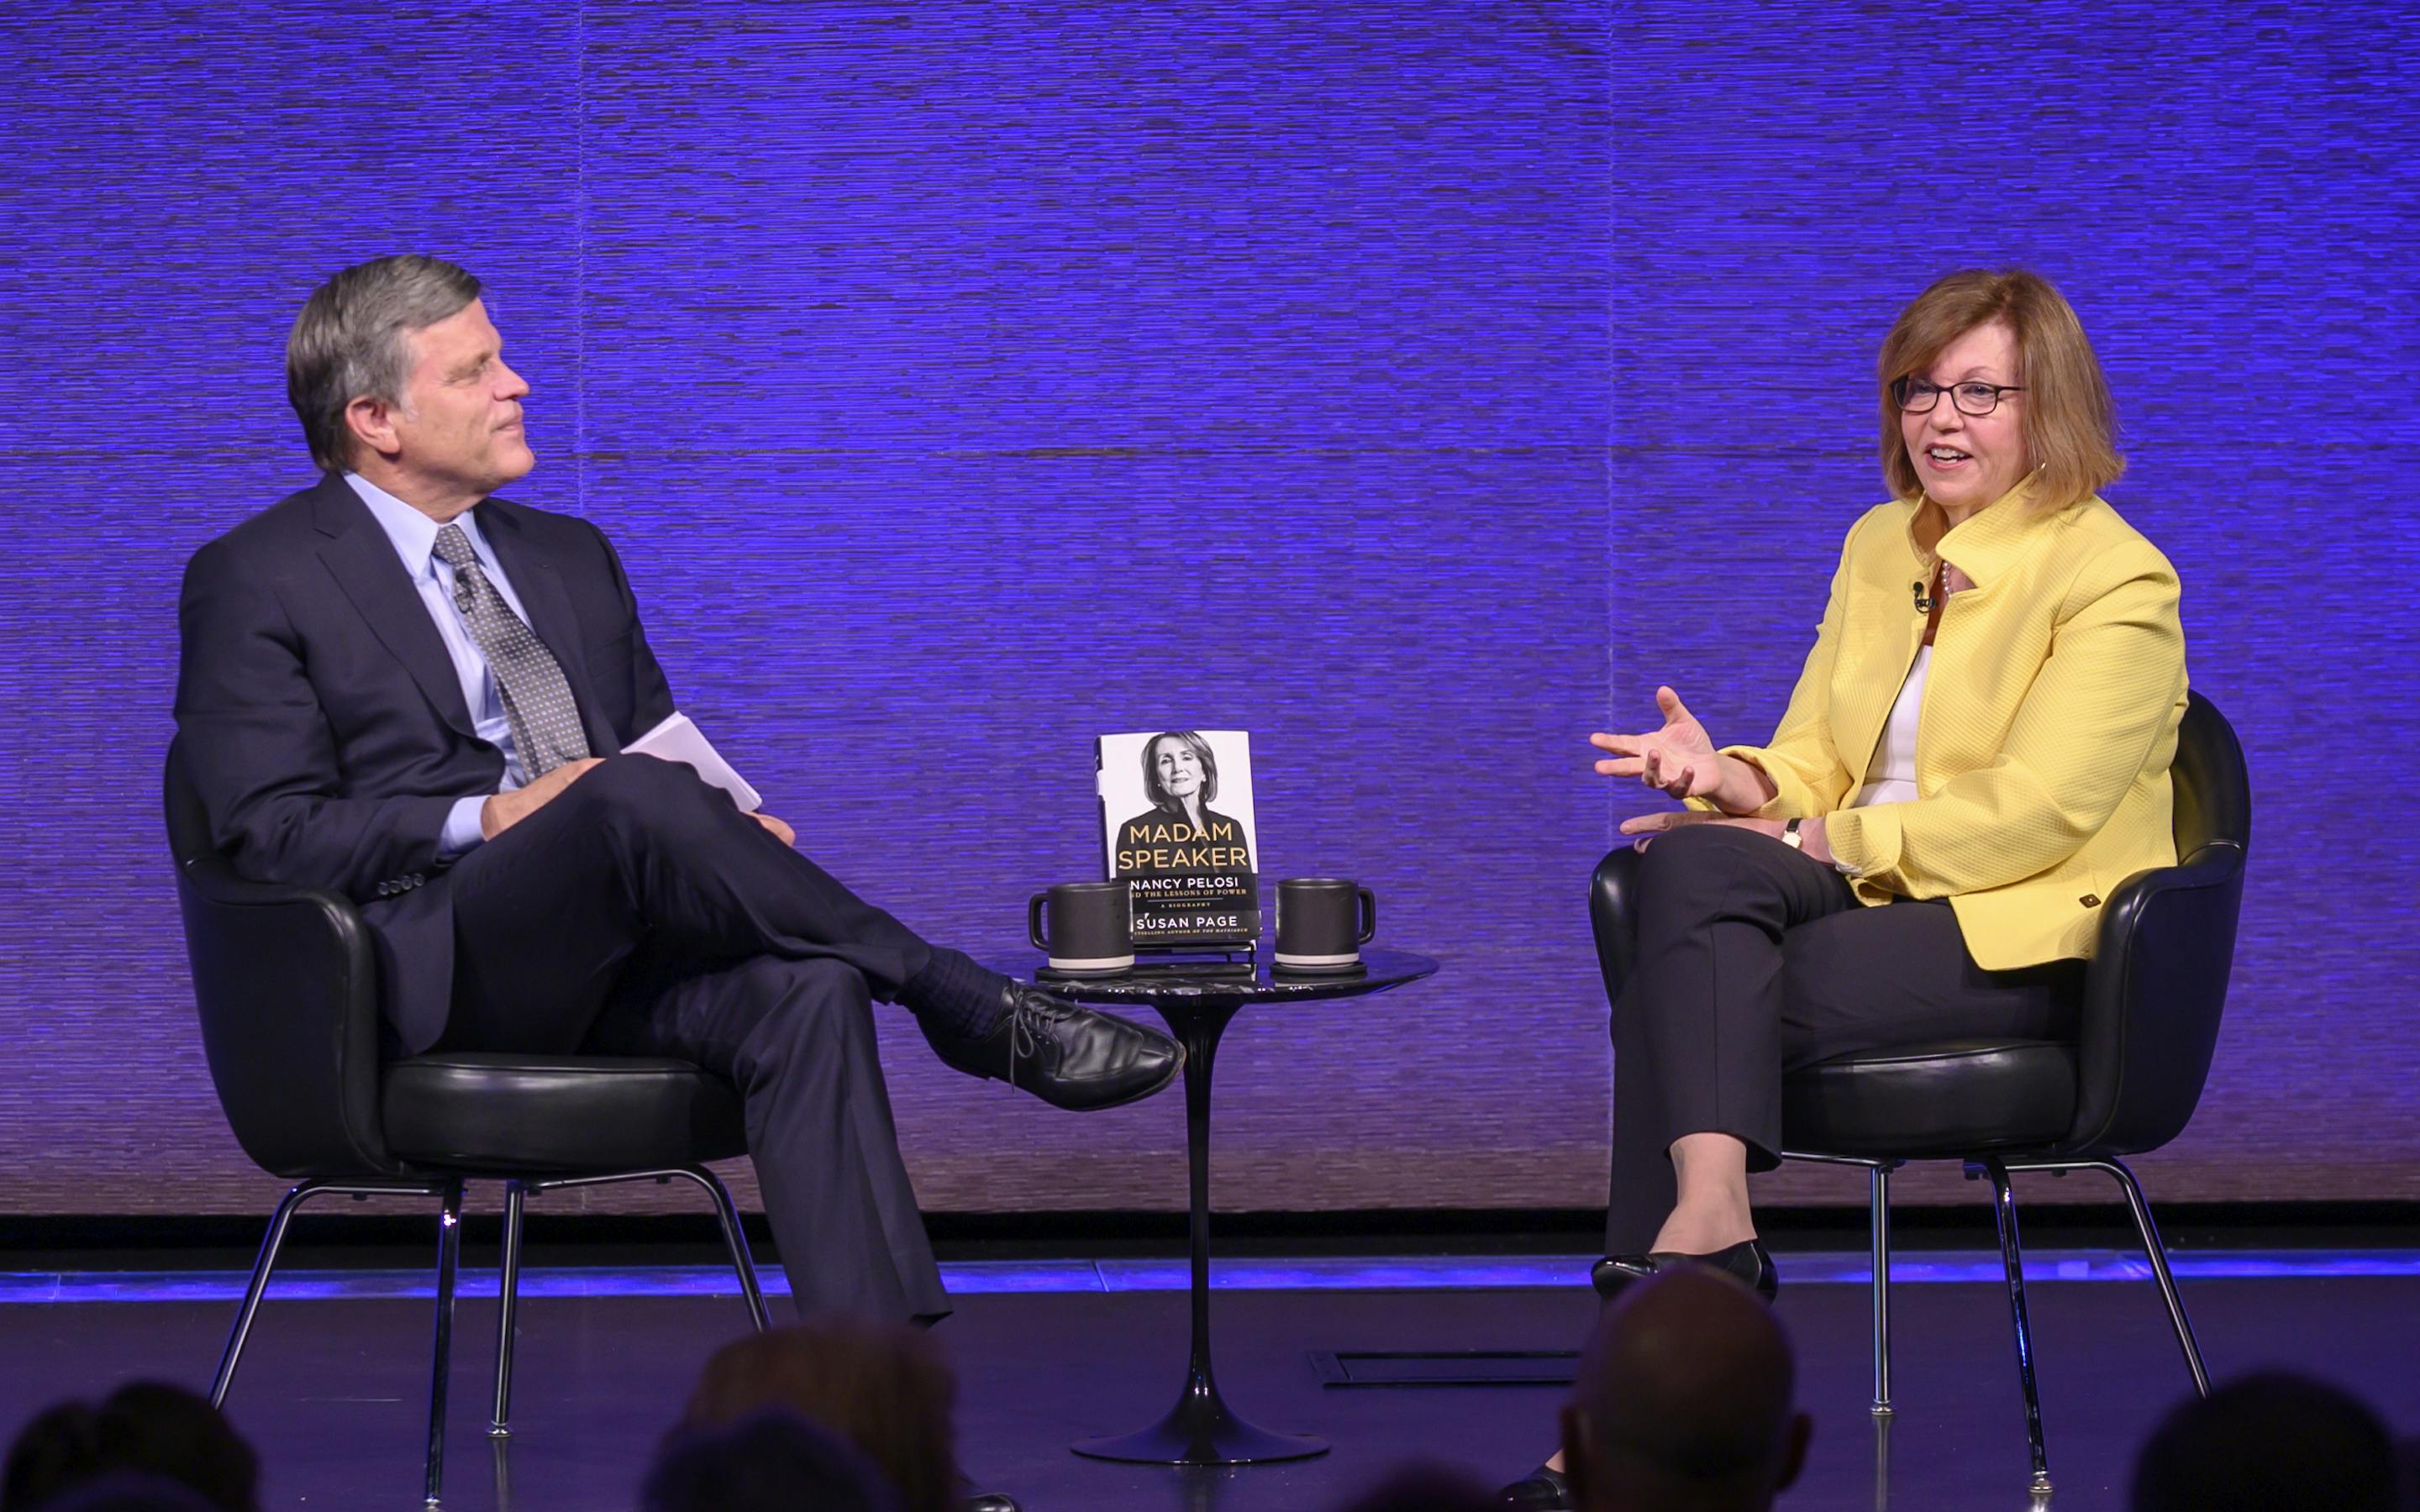 Douglas Brinkley and Susan Page on stage in the auditorium during a talk on Nancy Pelosi